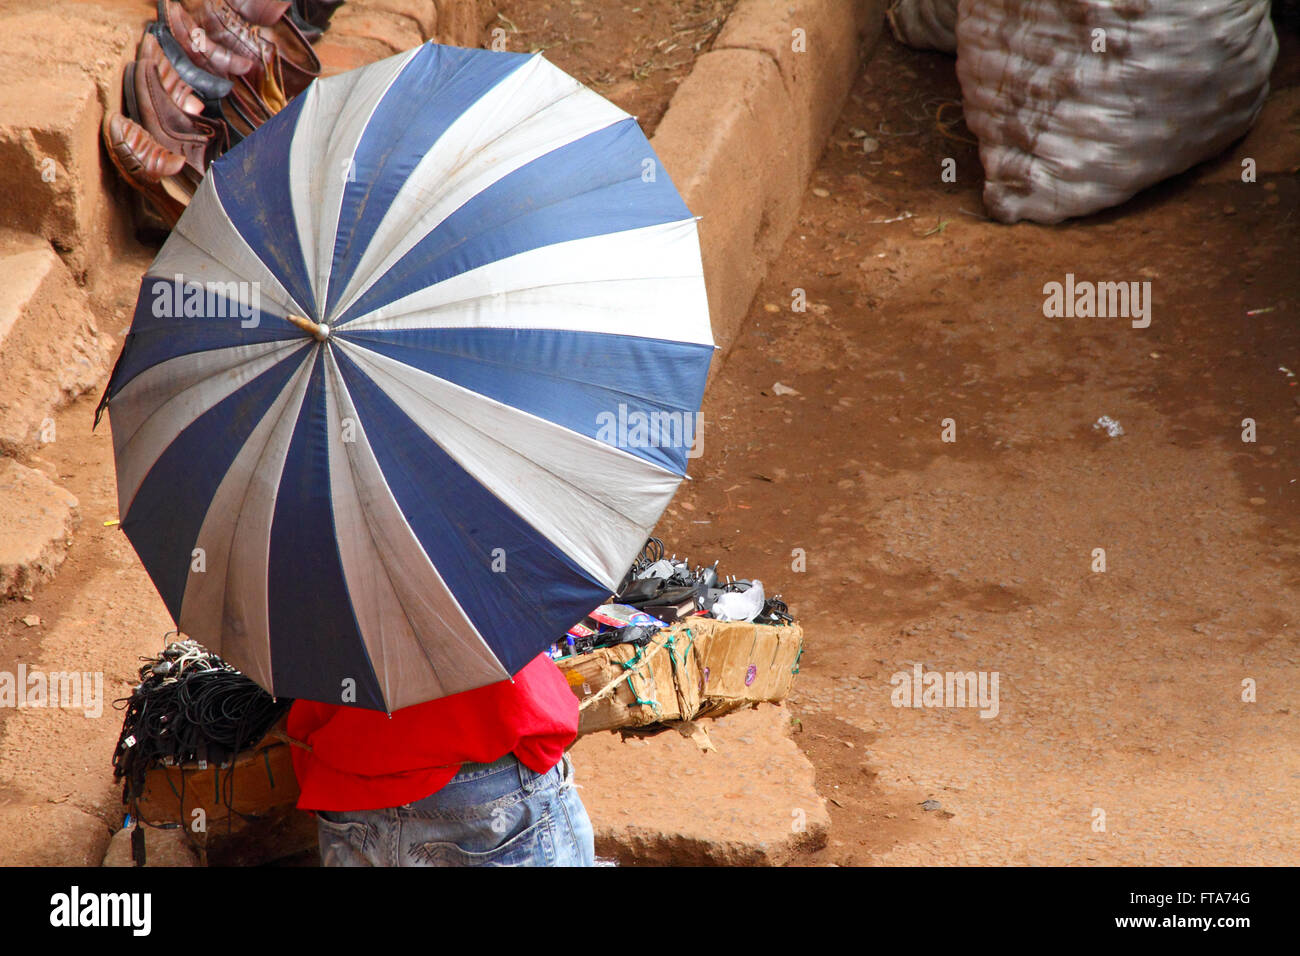 A market vendor stands by his merchandise completely covered in a large white and blue umbrella. Stock Photo